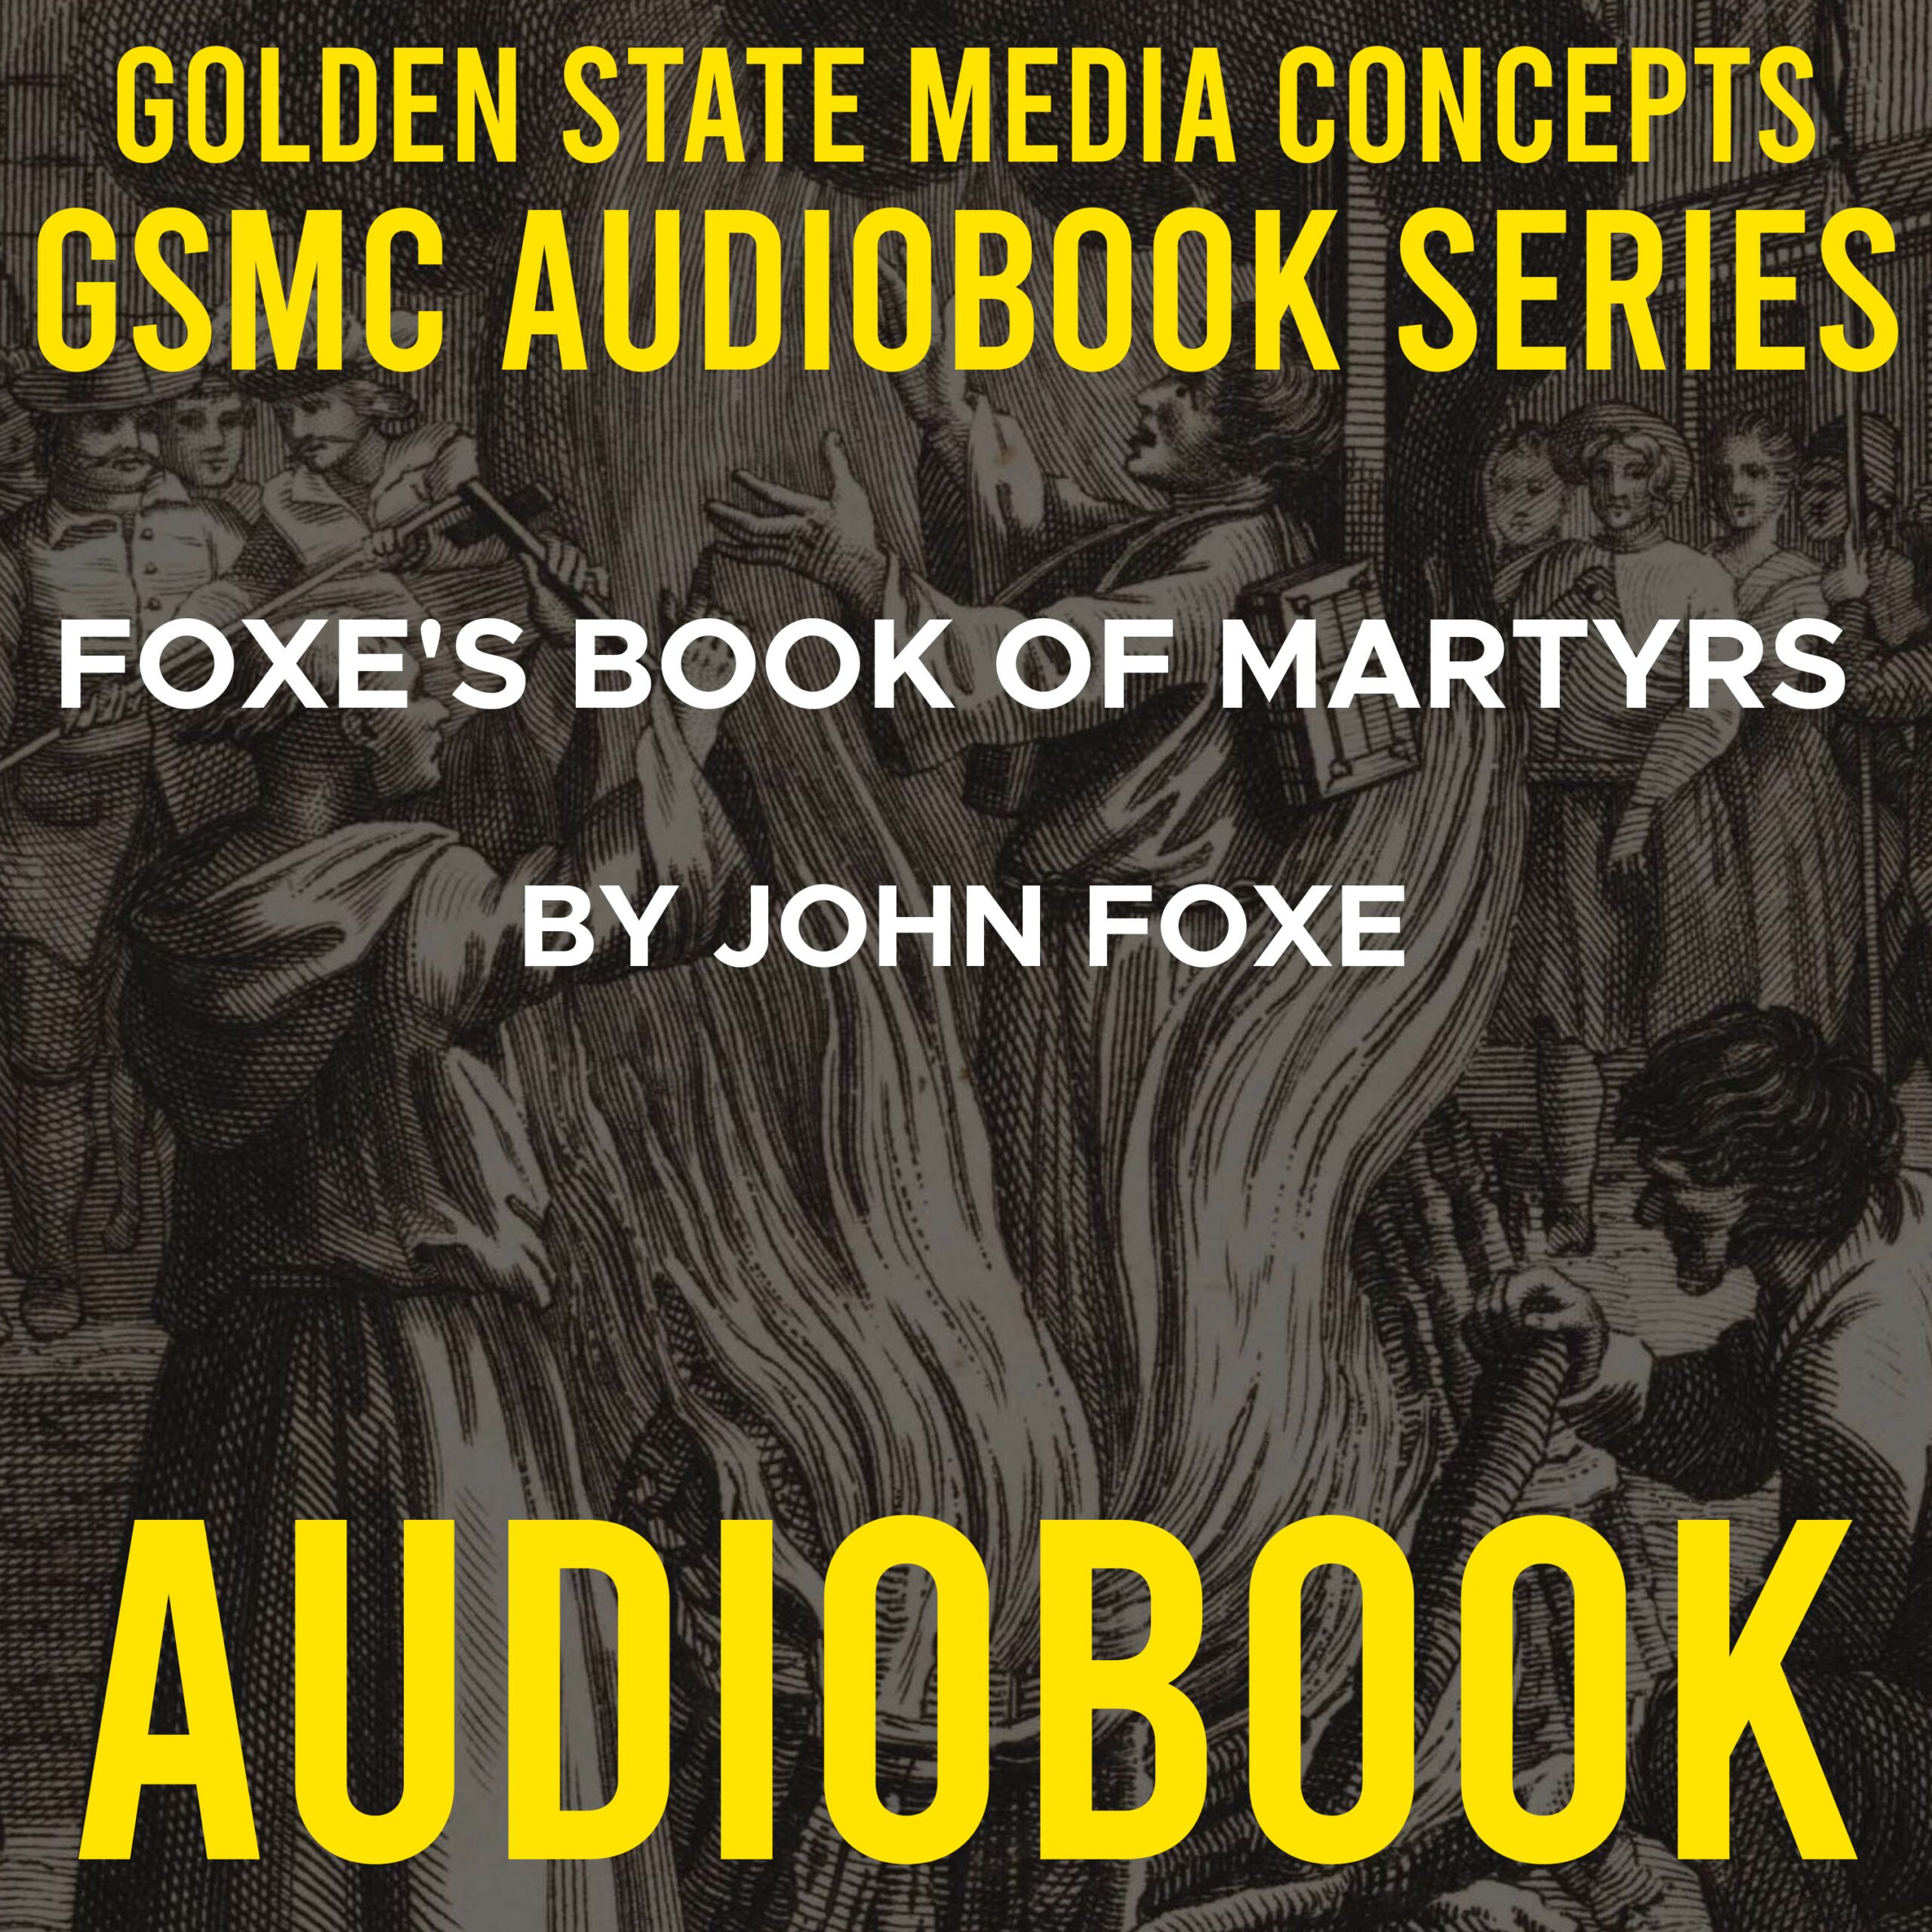 GSMC Audiobook Series: Foxe’s Book of Martyrs